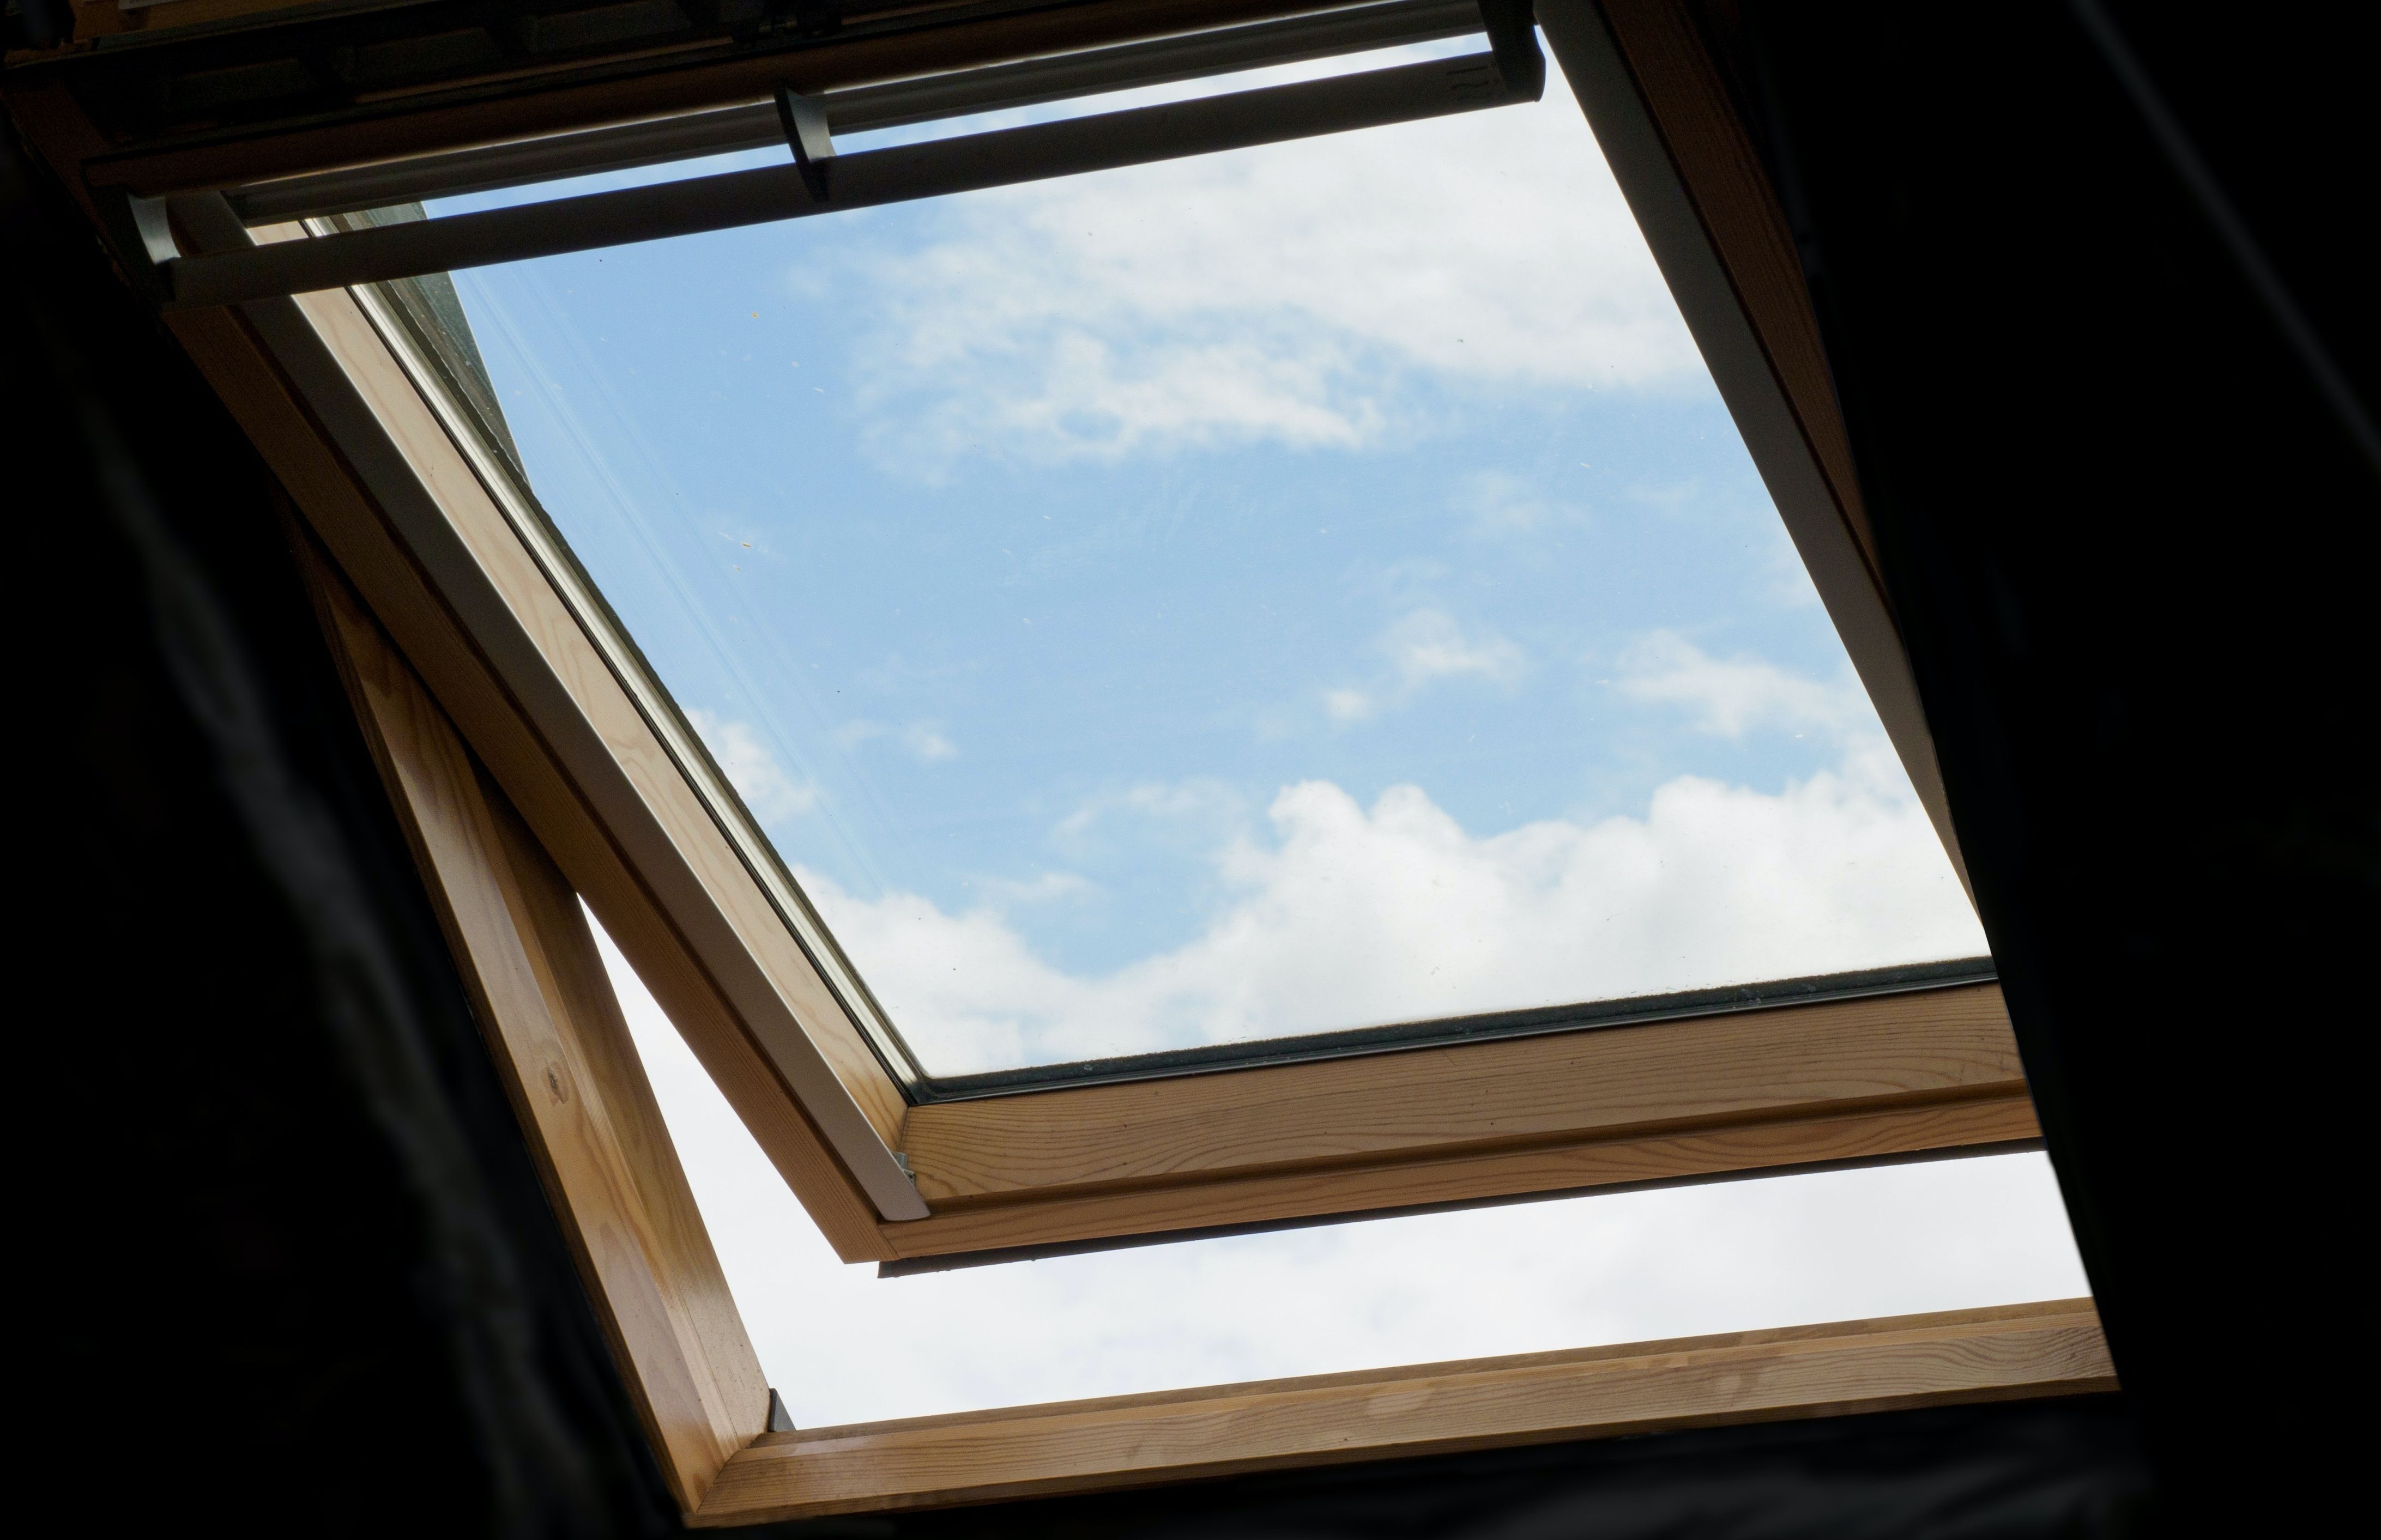 Bespoke Skylights: Fixed or Vented?